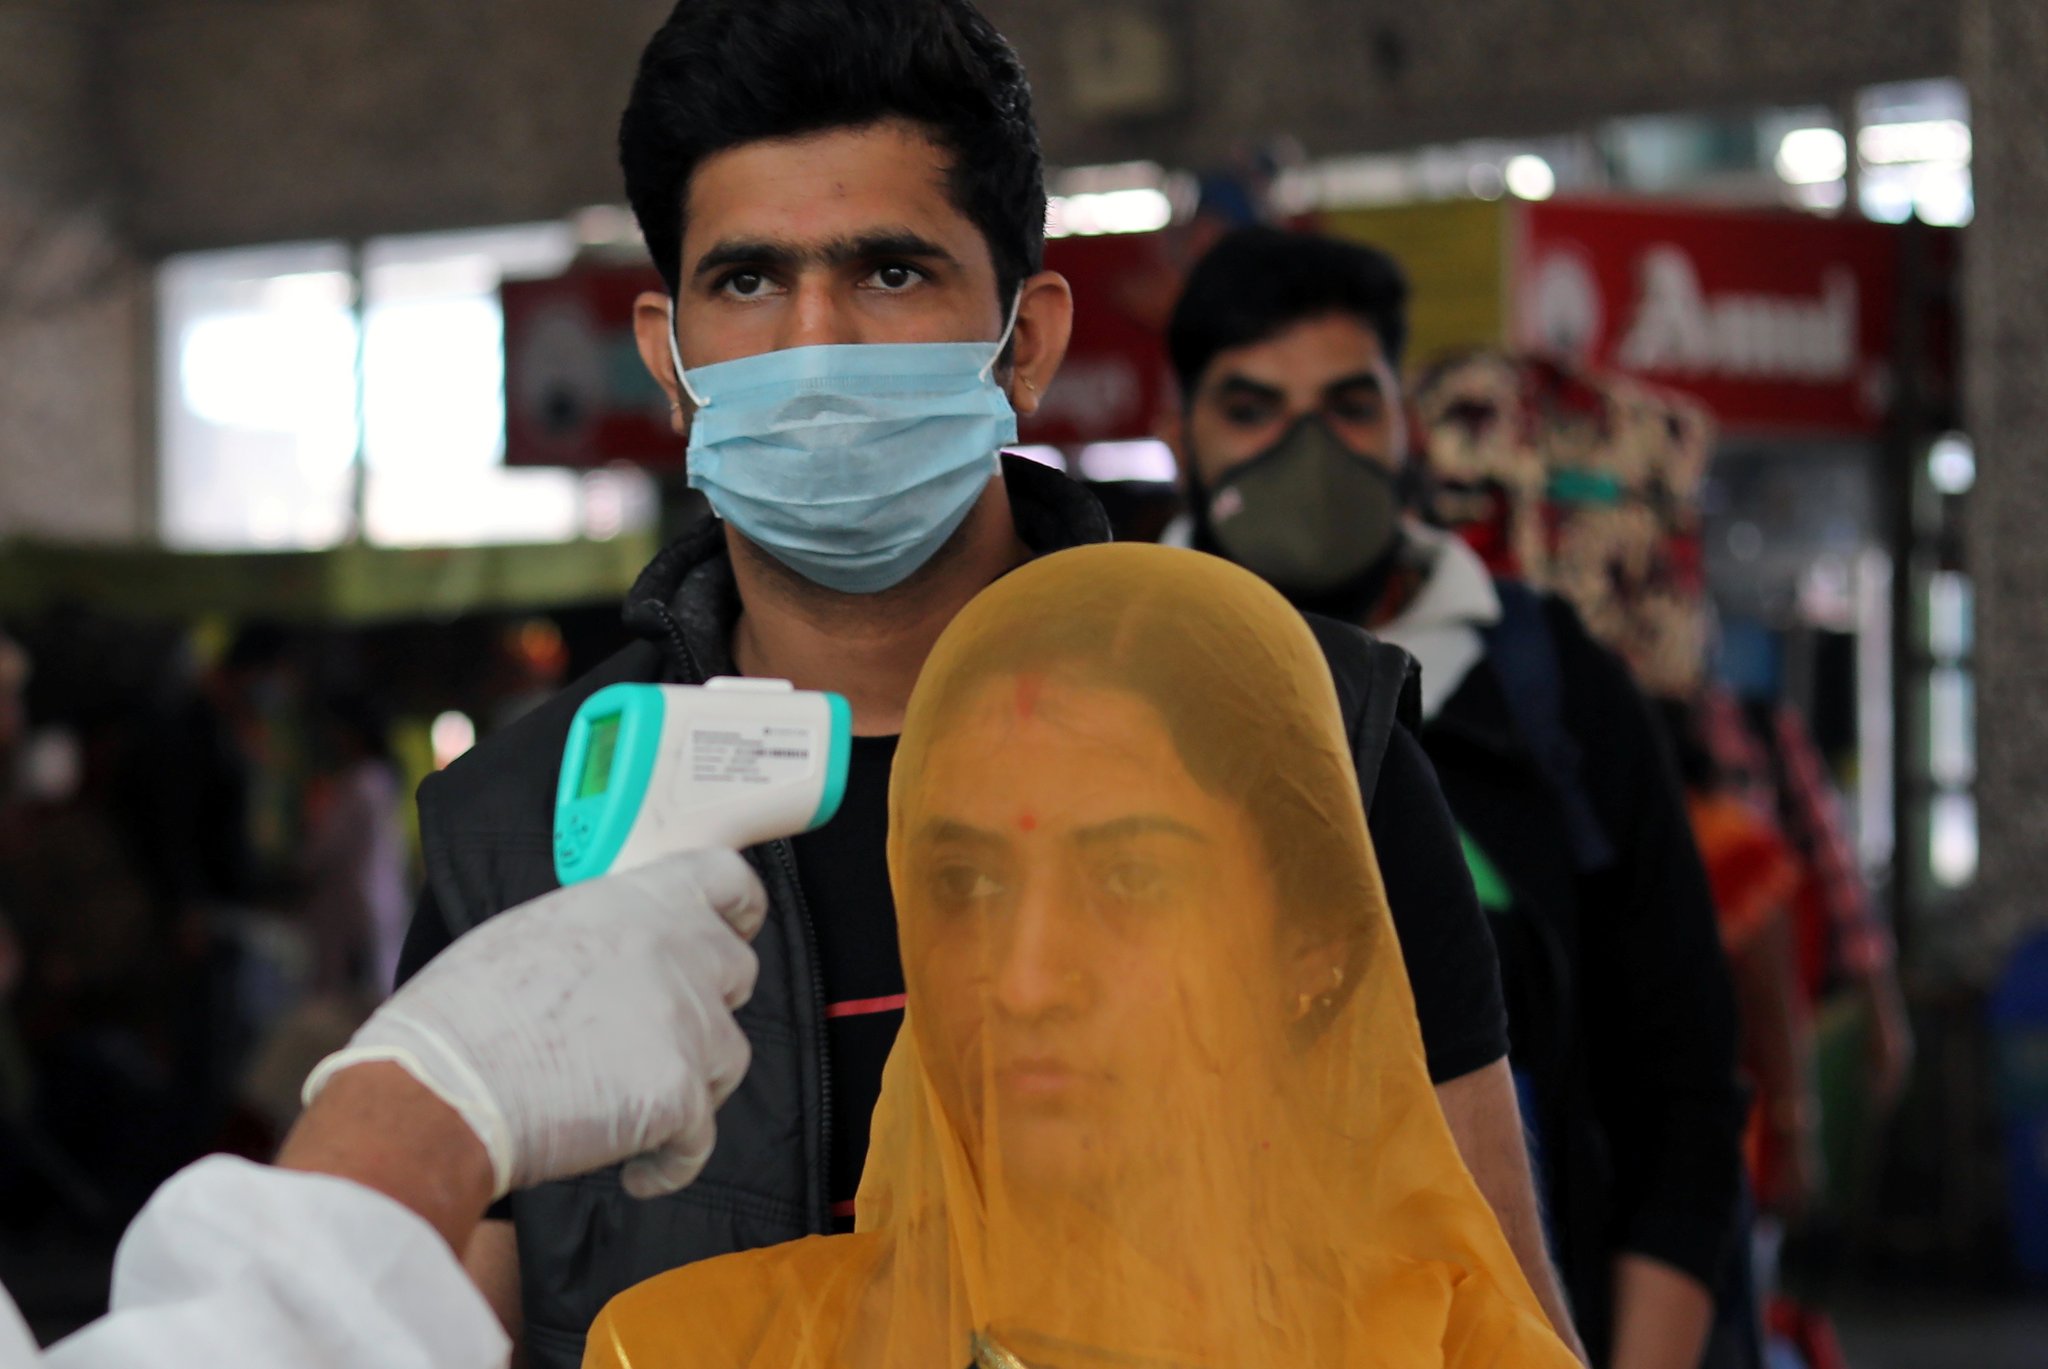 A health worker in personal protective equipment (PPE) checks the temperature of passengers amid the spread of the coronavirus disease (COVID-19), at a railway station in Mumbai, India, December 19, 2020. REUTERS/Francis Mascarenhas